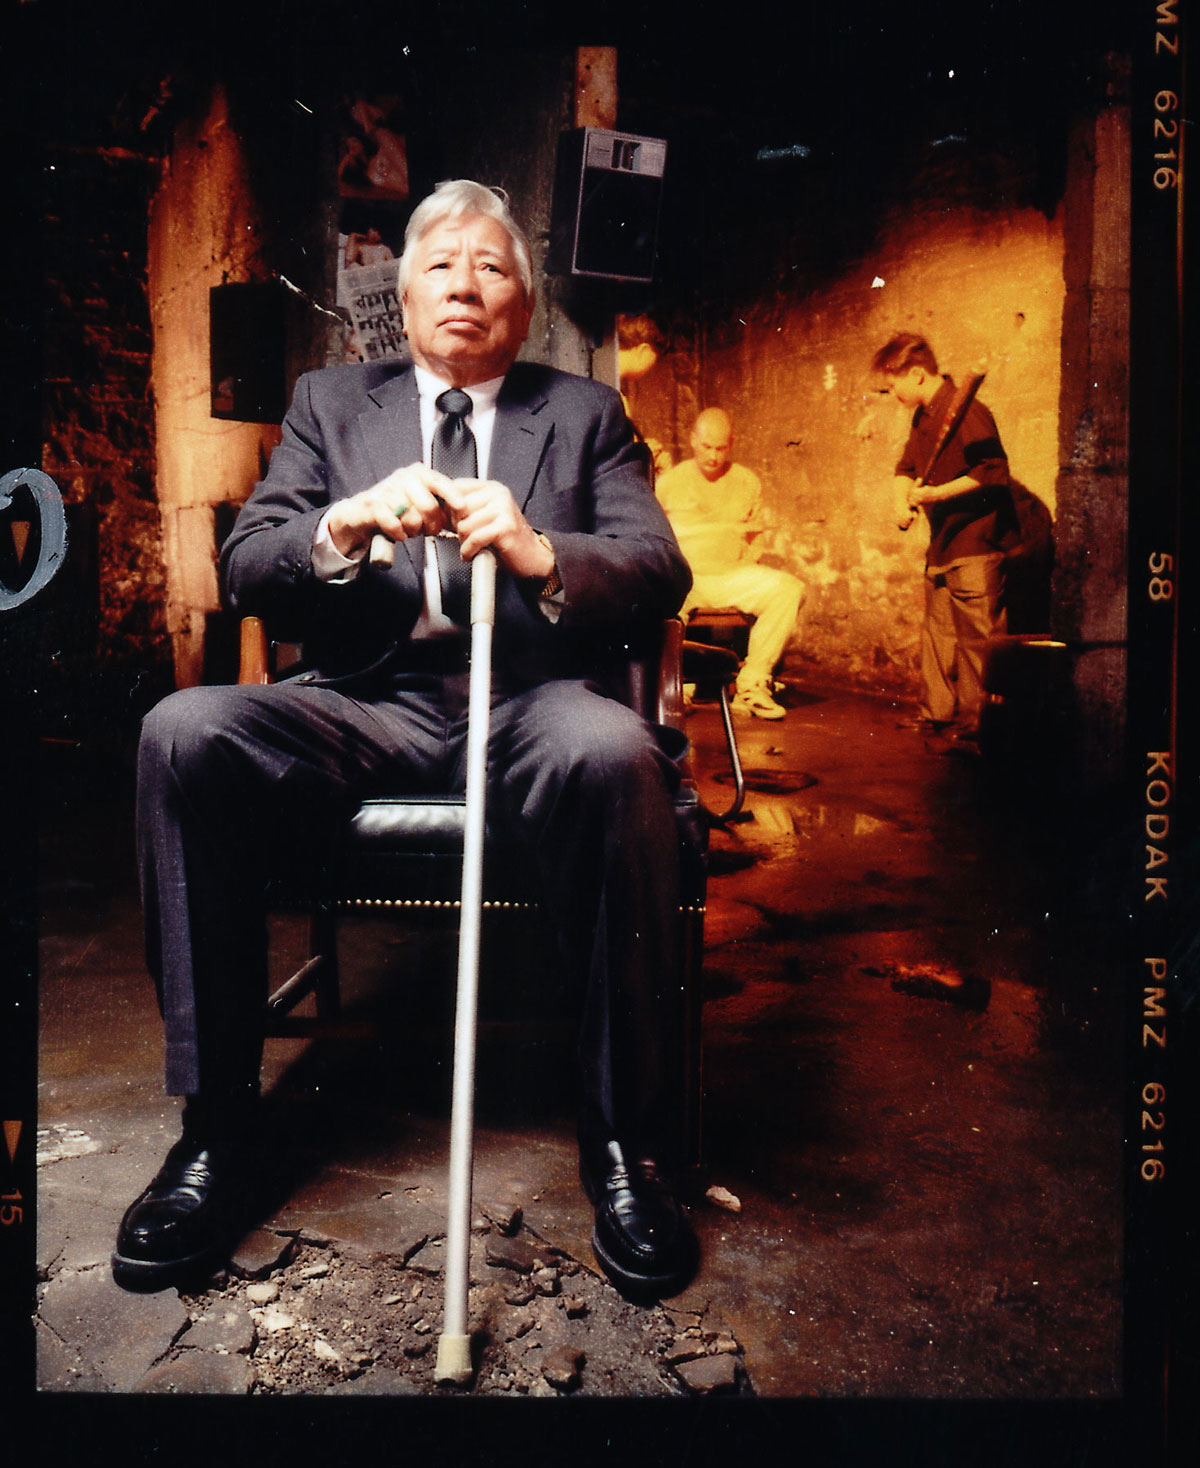 Older man in suit sits with cane in hands, in background, man holds bat in front of man in chair